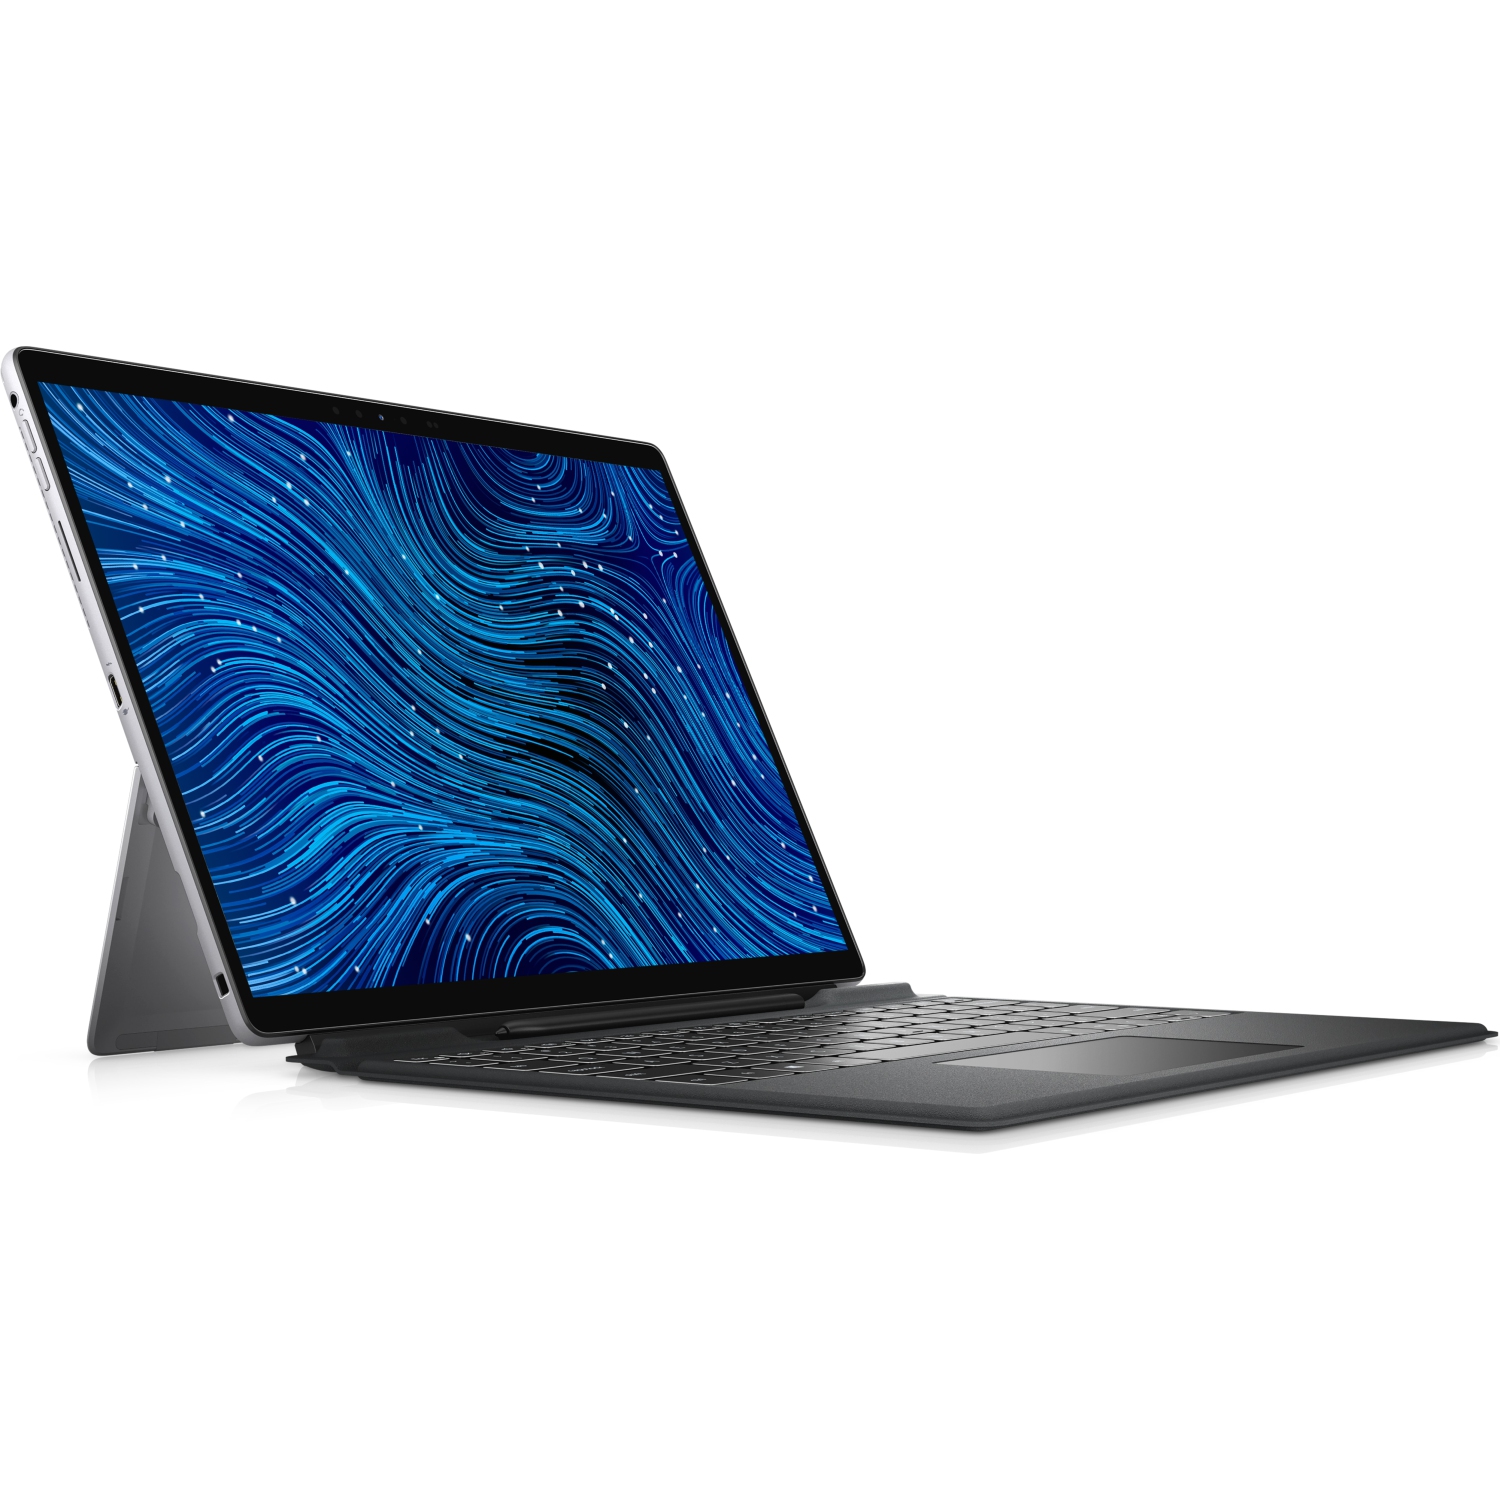 Refurbished (Excellent) - Dell Latitude 7000 7320 Detachable 13 2-in-1 (2021), 13" FHD+ Touch, Core i5, 256GB SSD, 16GB RAM, 4 Cores @ 4.2 GHz, 11th Gen CPU Certified